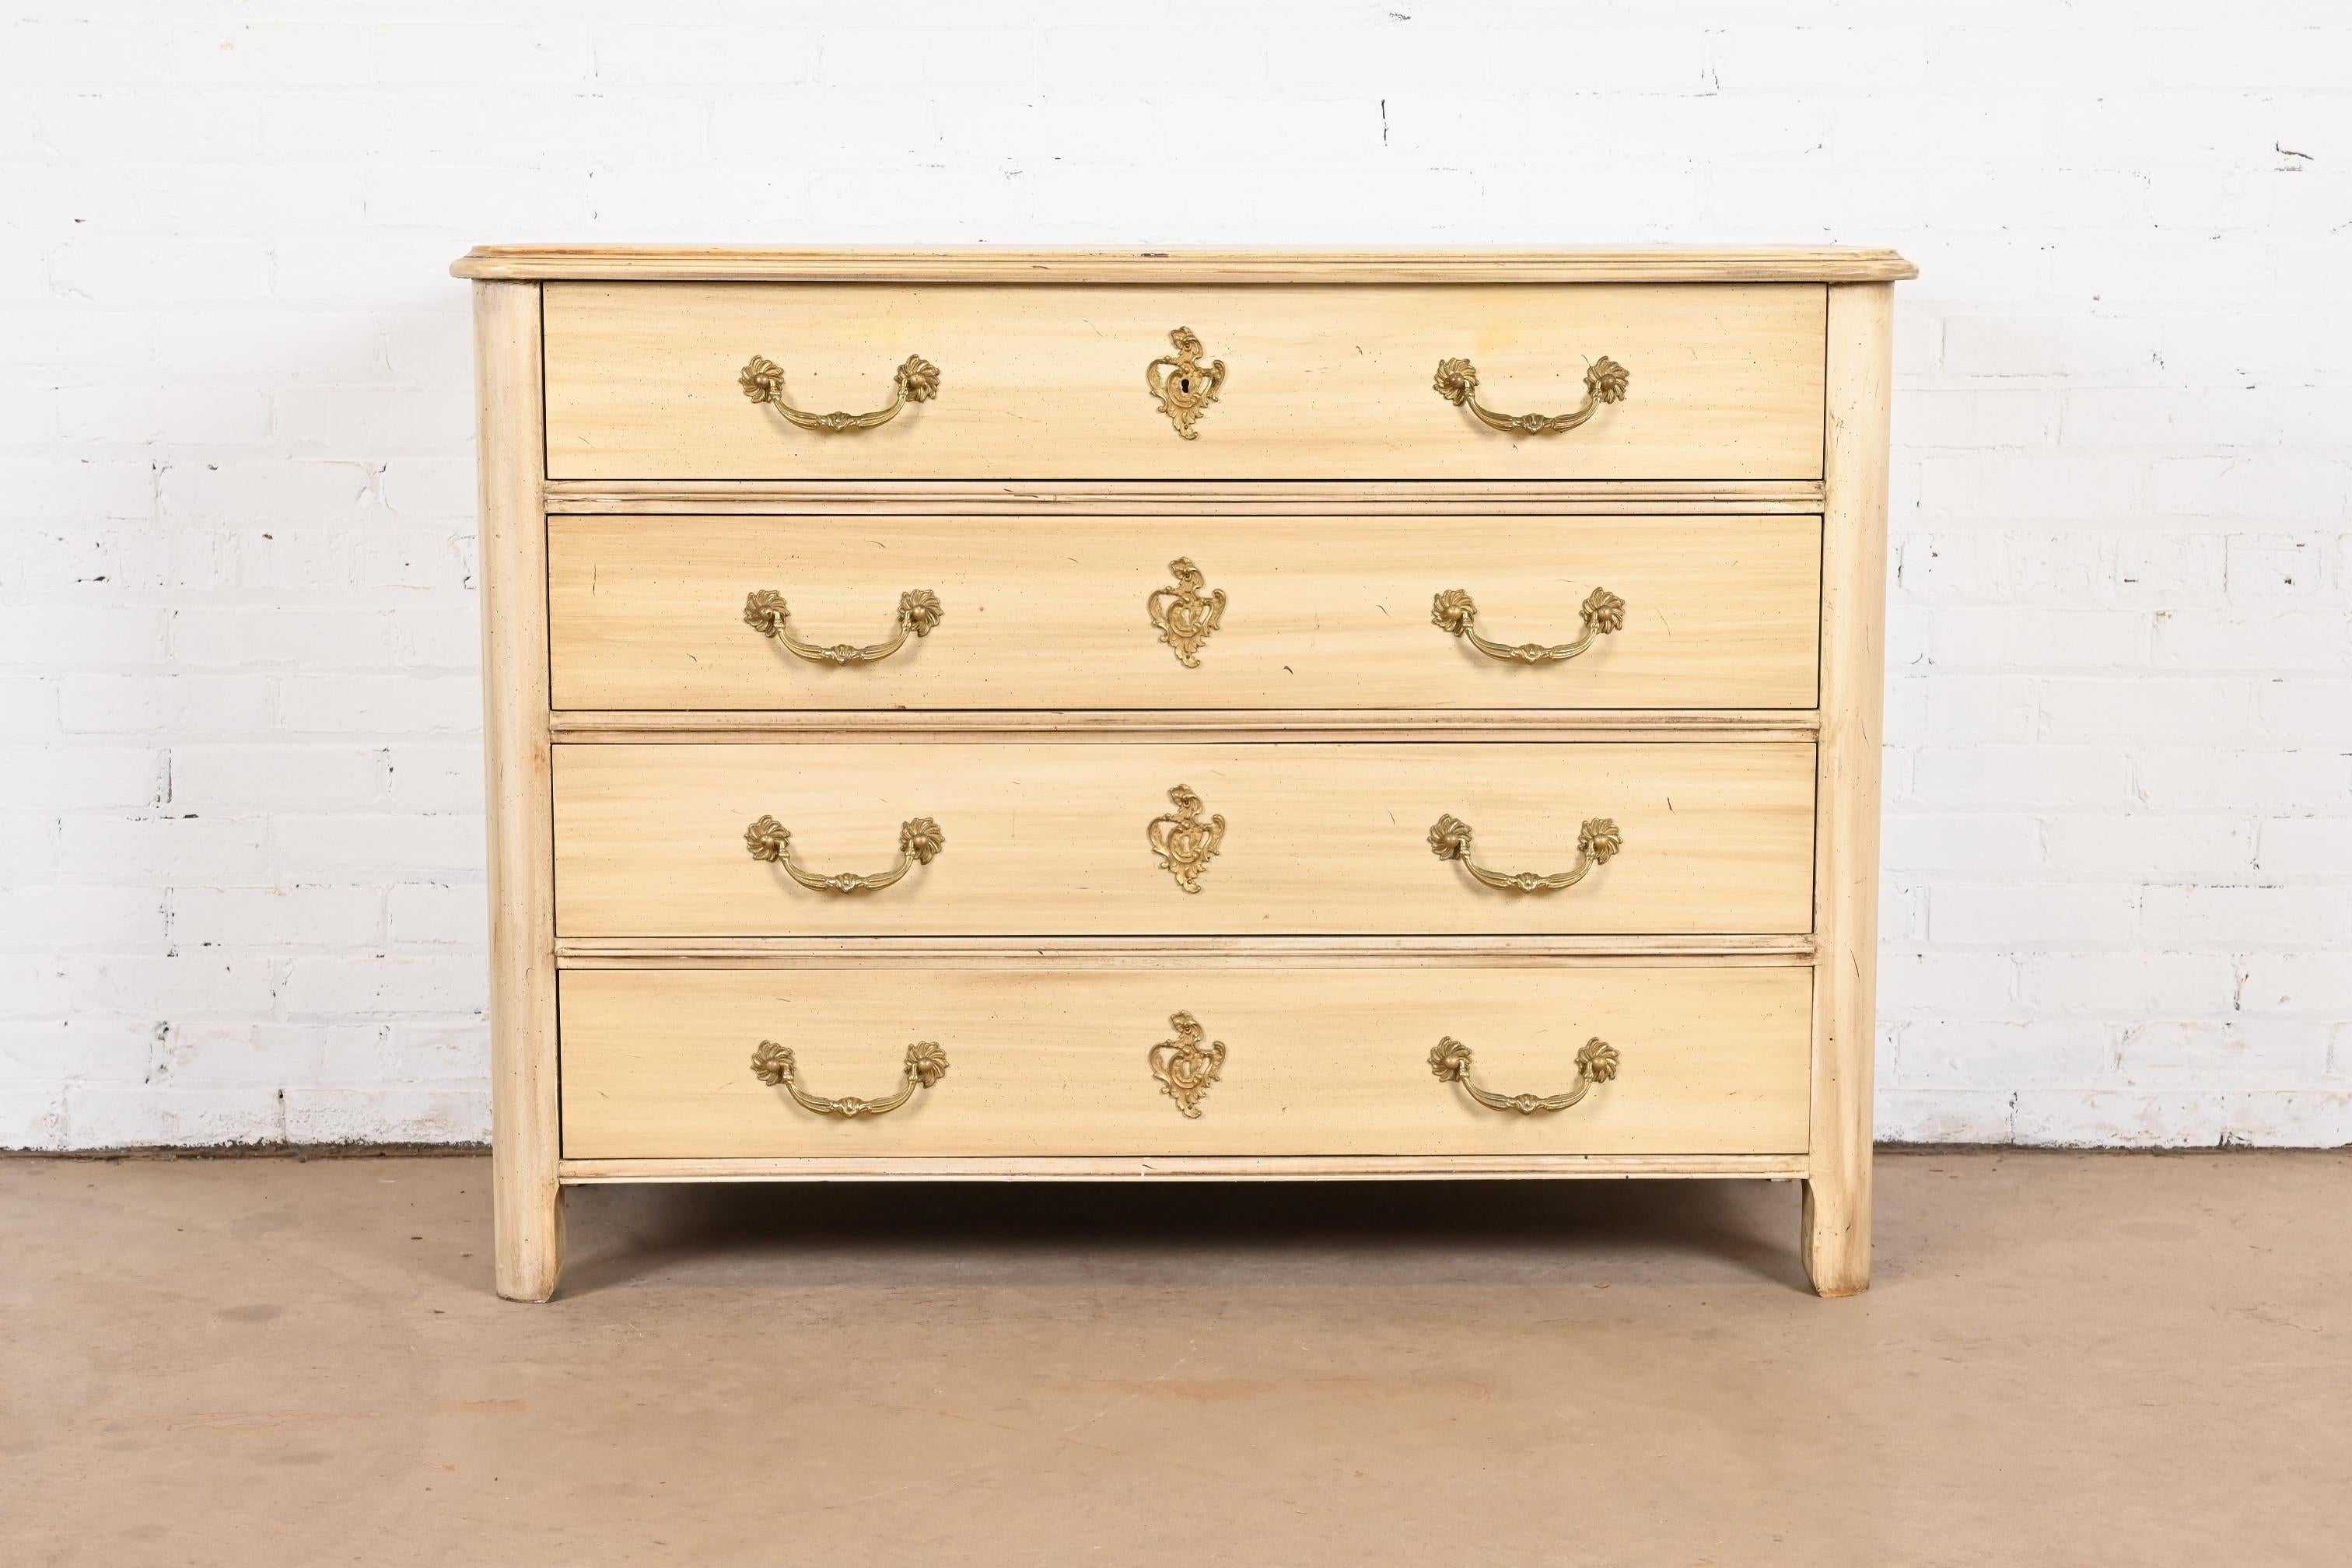 Louis XV Baker Furniture French Provincial Cream Painted Chest of Drawers, Circa 1960s For Sale